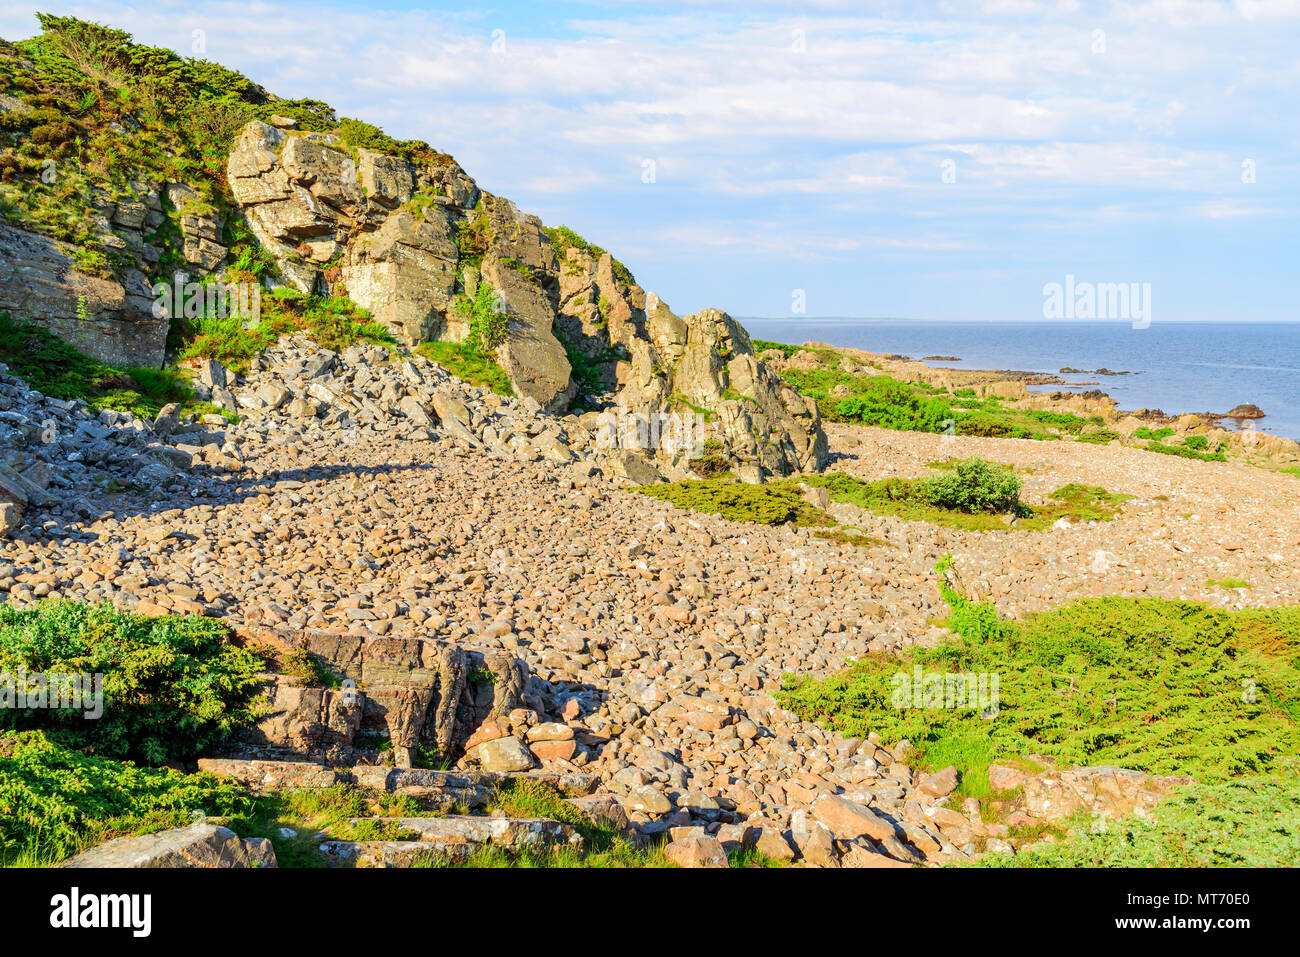 The rocky coastal landscape at Hovs hallar in the Bjare coast nature reserve in Sweden. It is a sunny and calm morning. Stock Photo